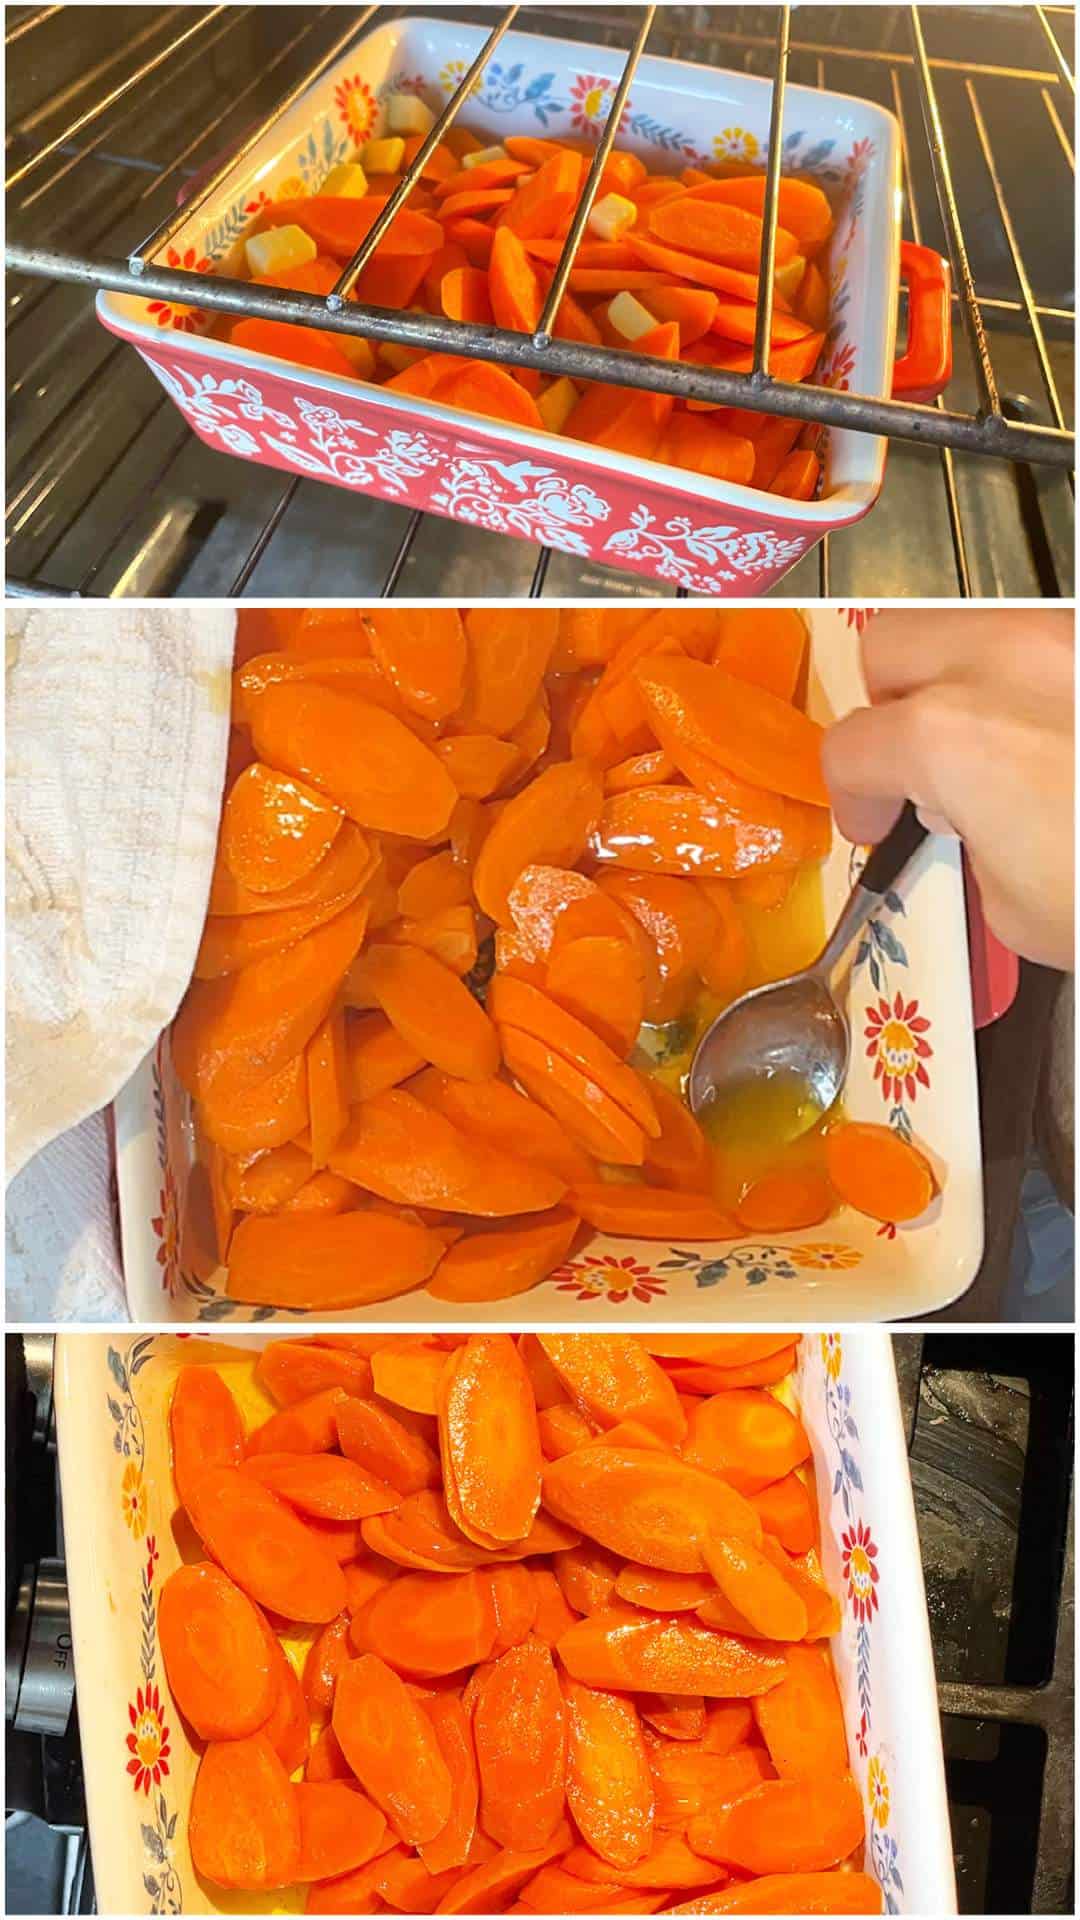 A collage of images showing butter roasted carrots baking in the oven.